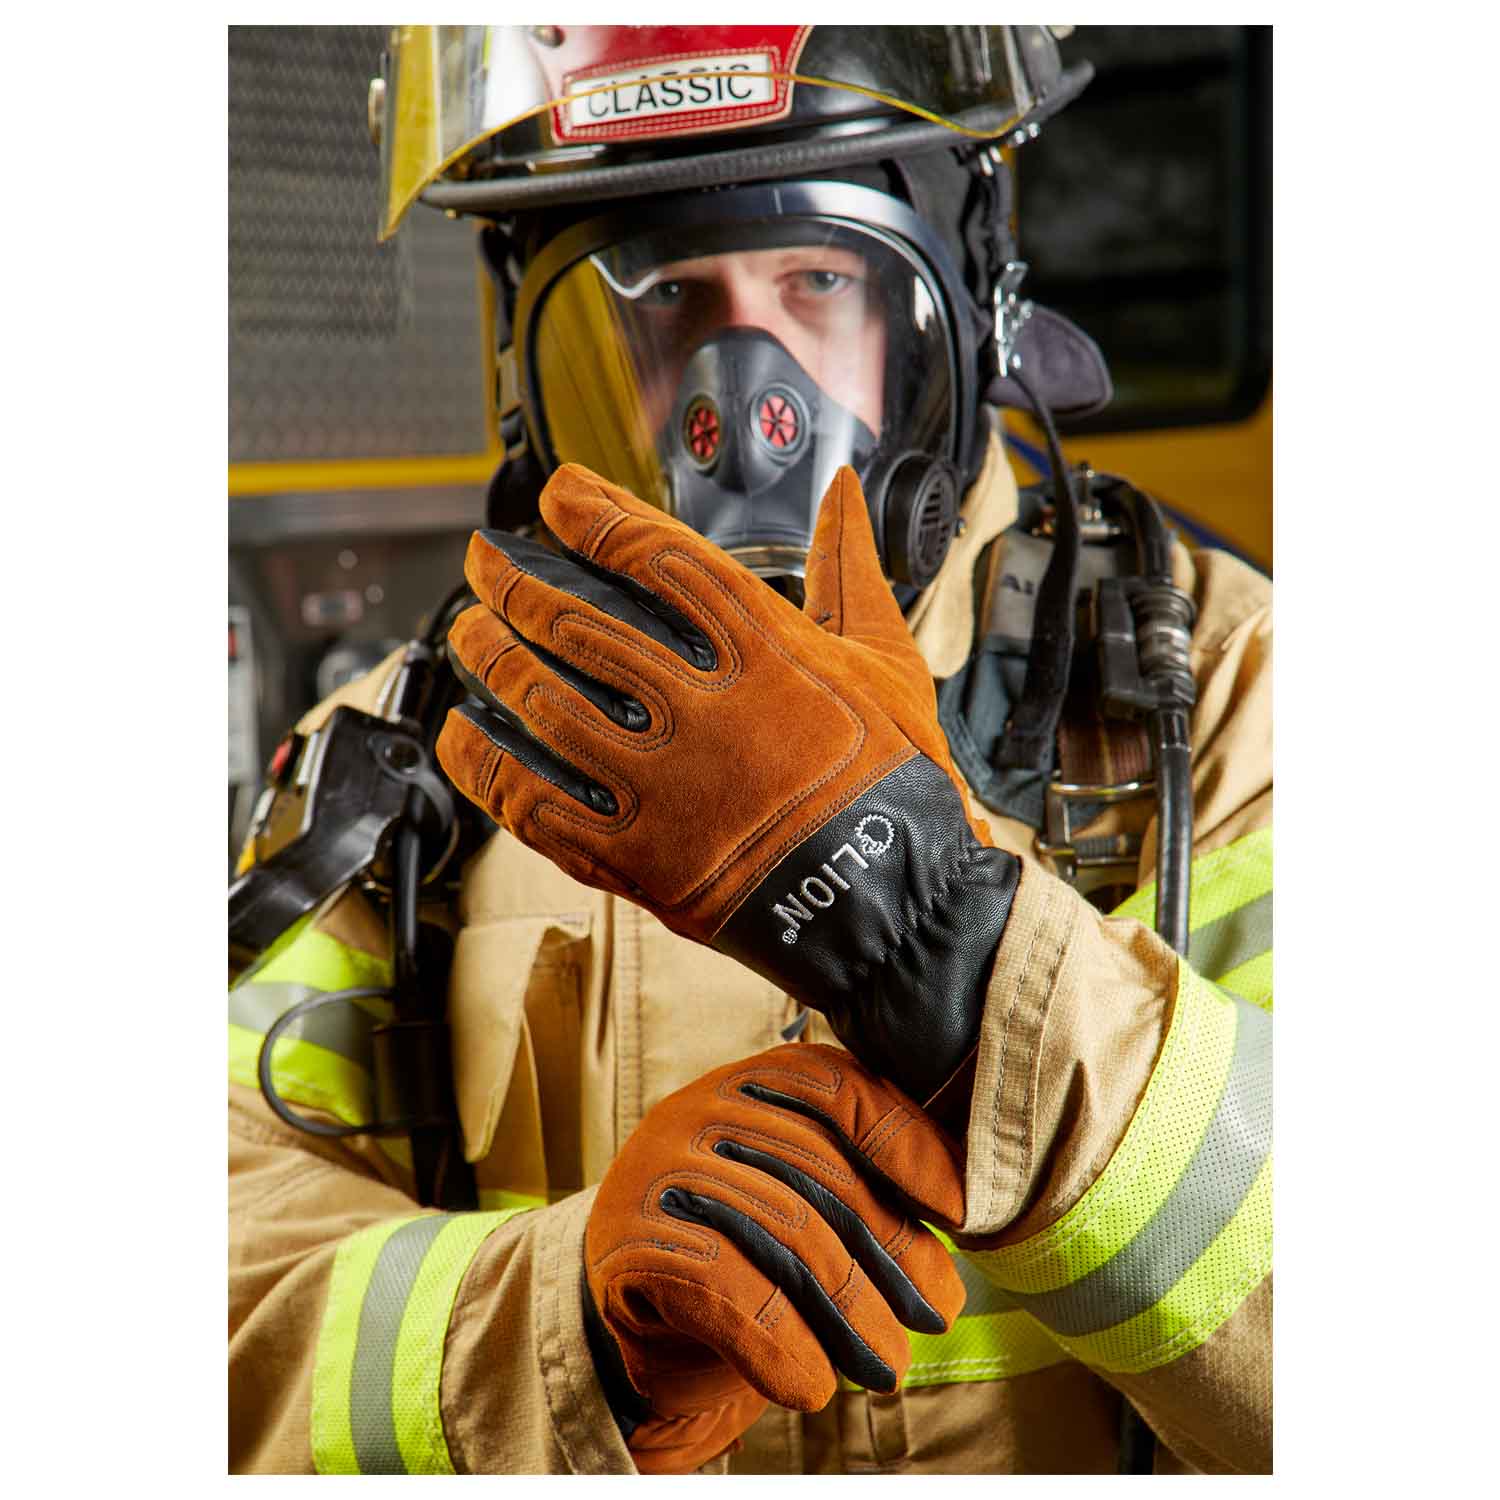 LION Victory NFPA Structural Firefighting Gloves